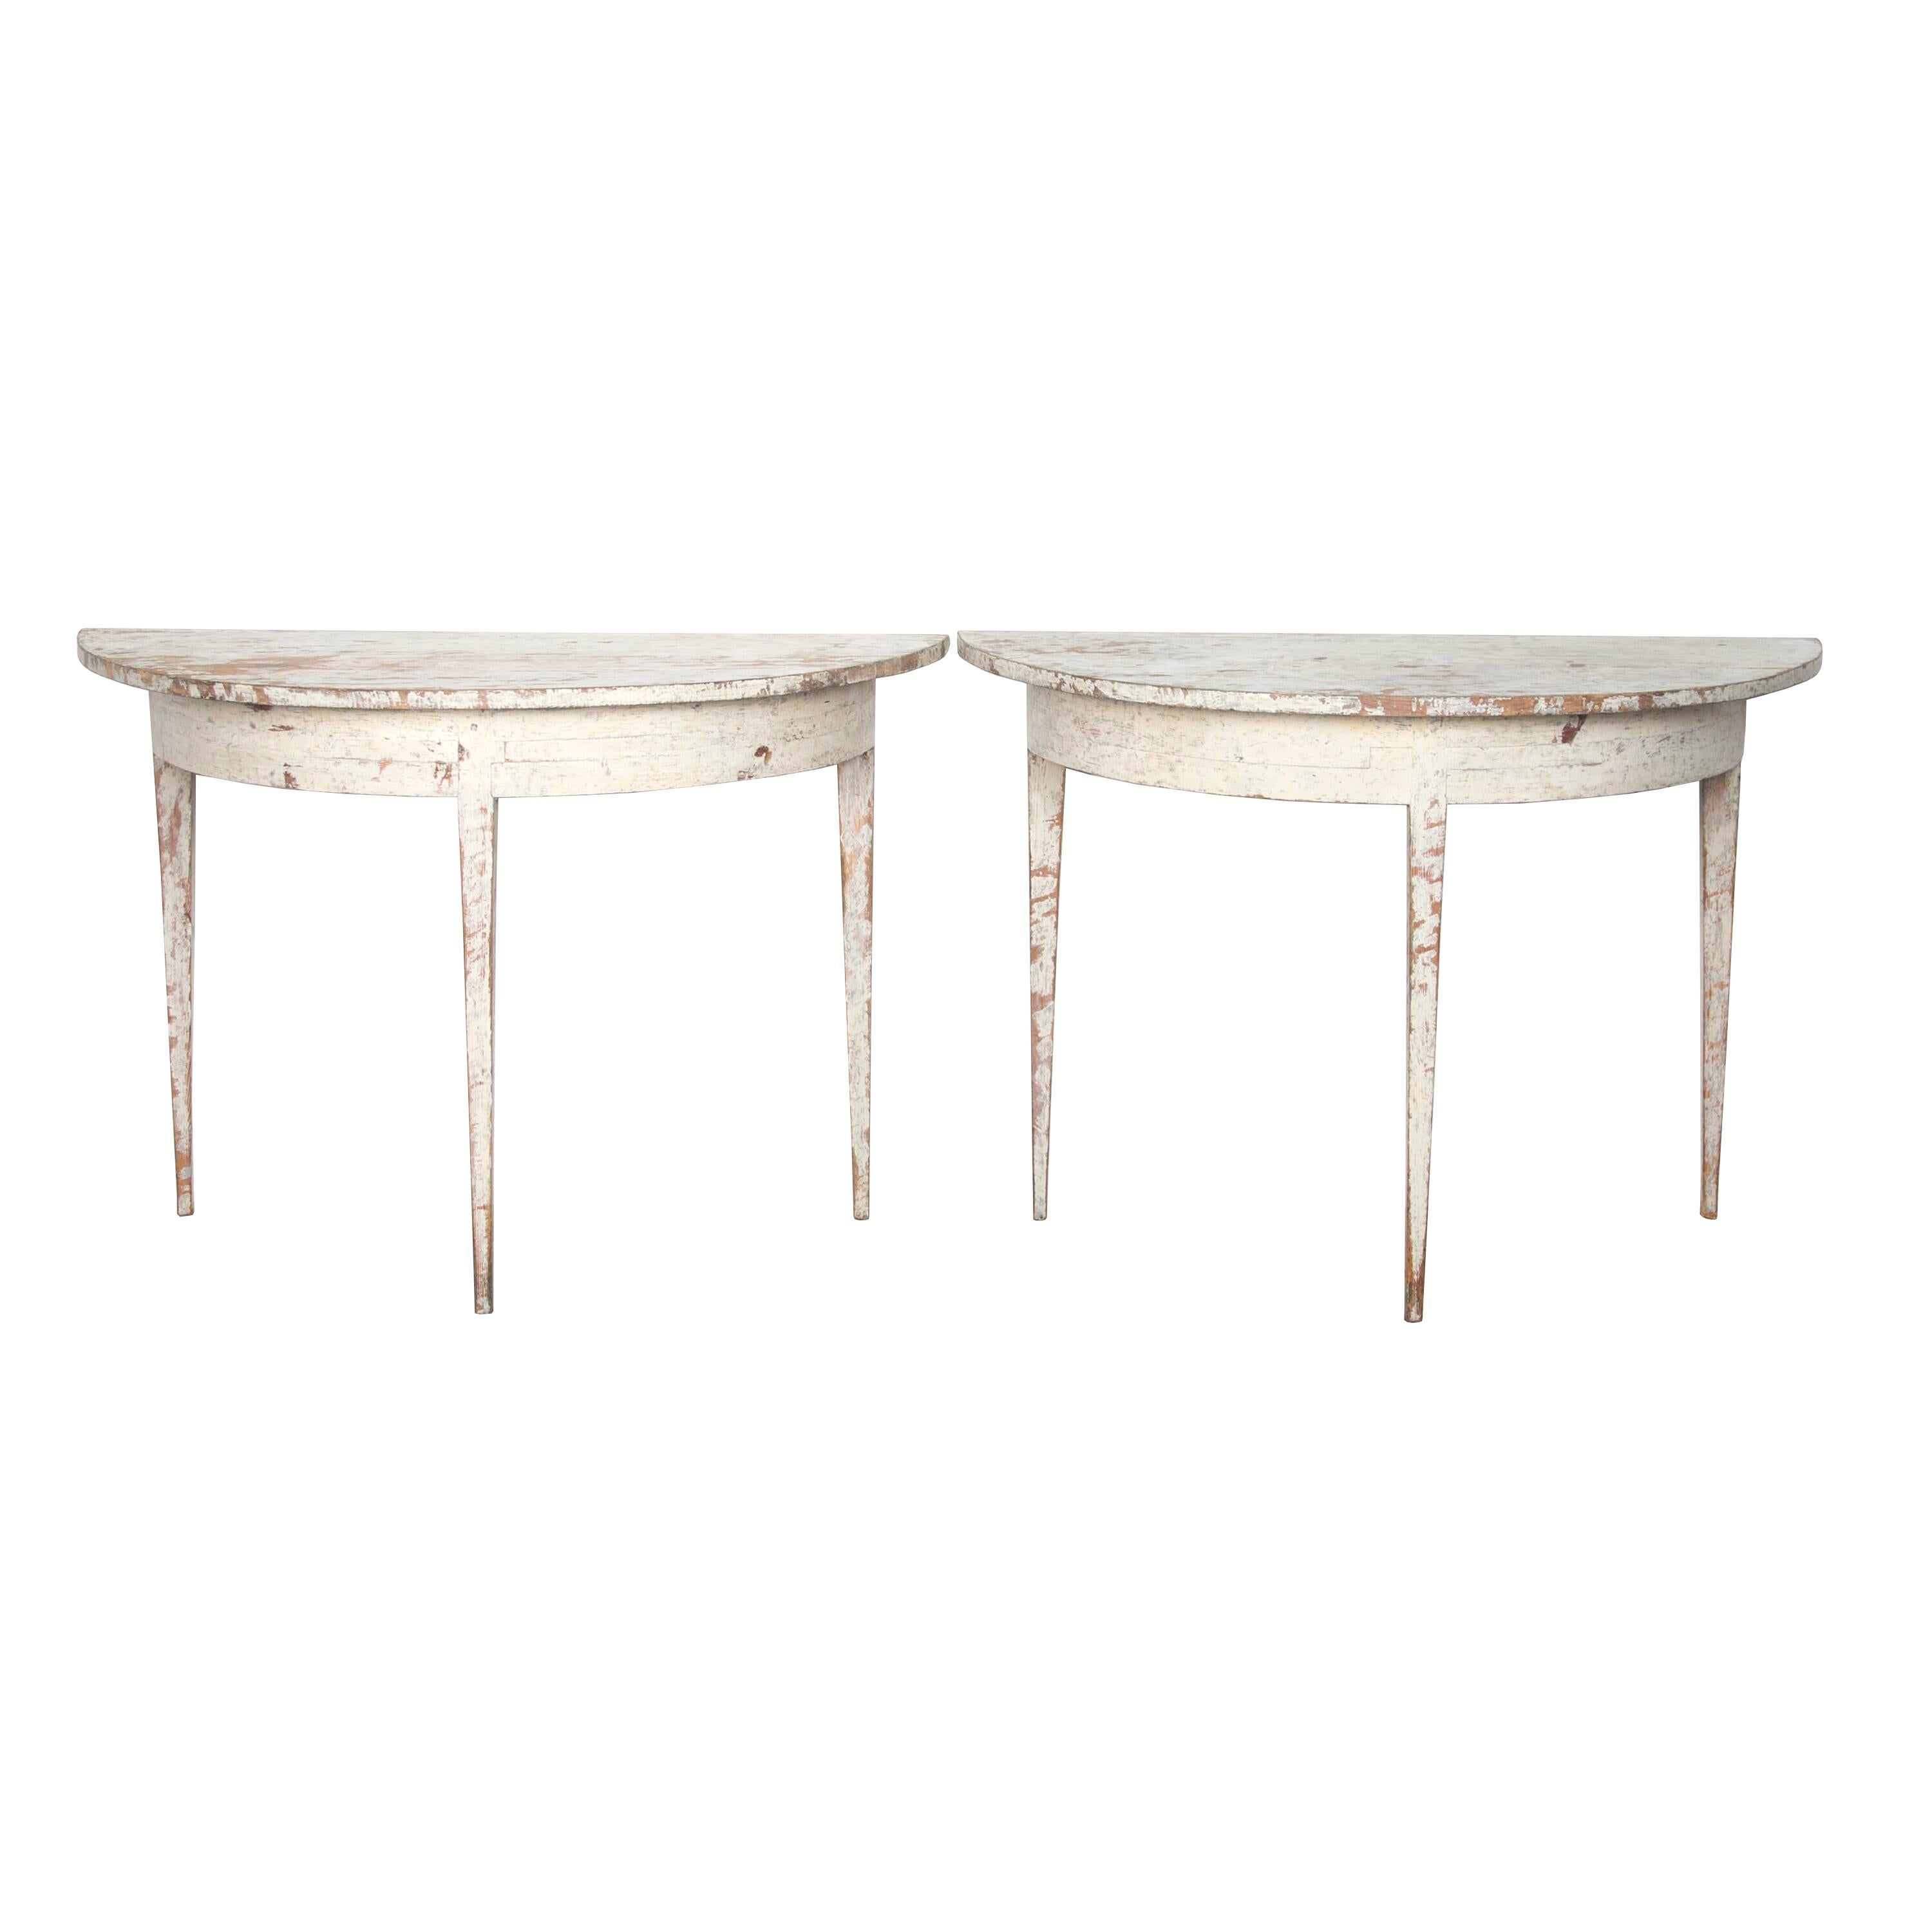 Period pair of 19th Century Demi lunes that are simple in design and style.
Scraped to original paint.